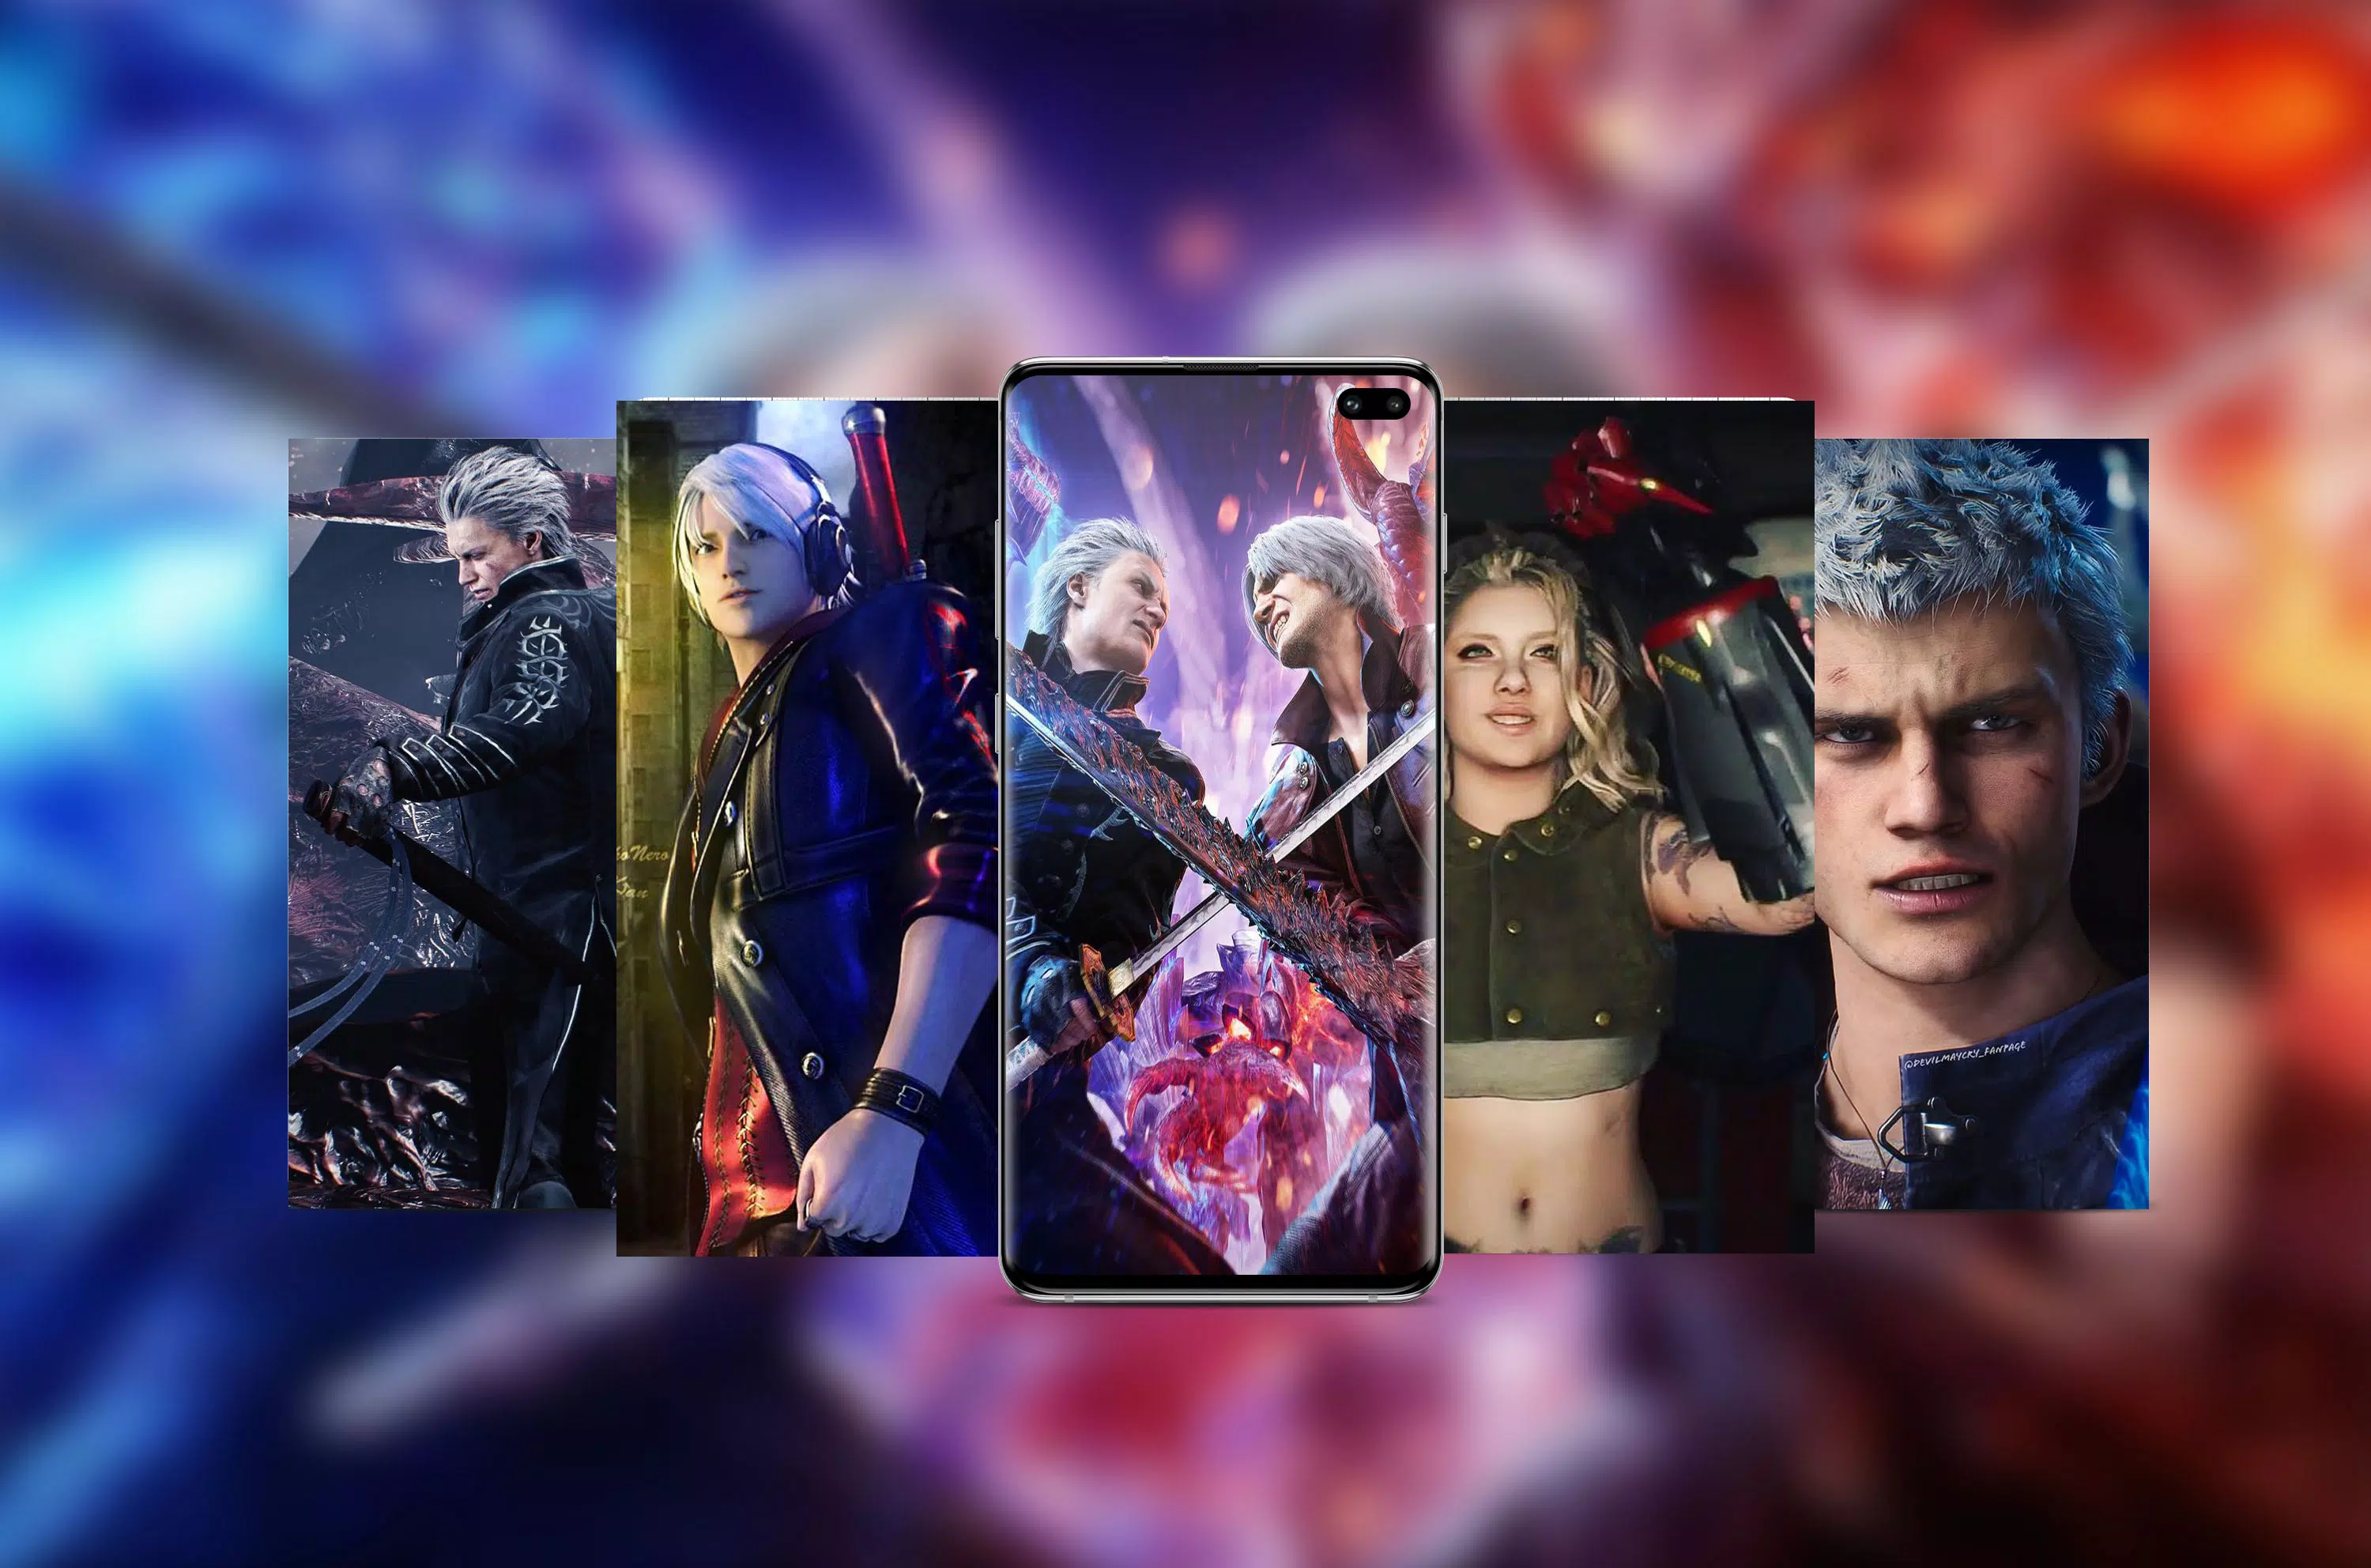 Devil May Cry 5 Live Wallpaper HD 4K APK for Android Download